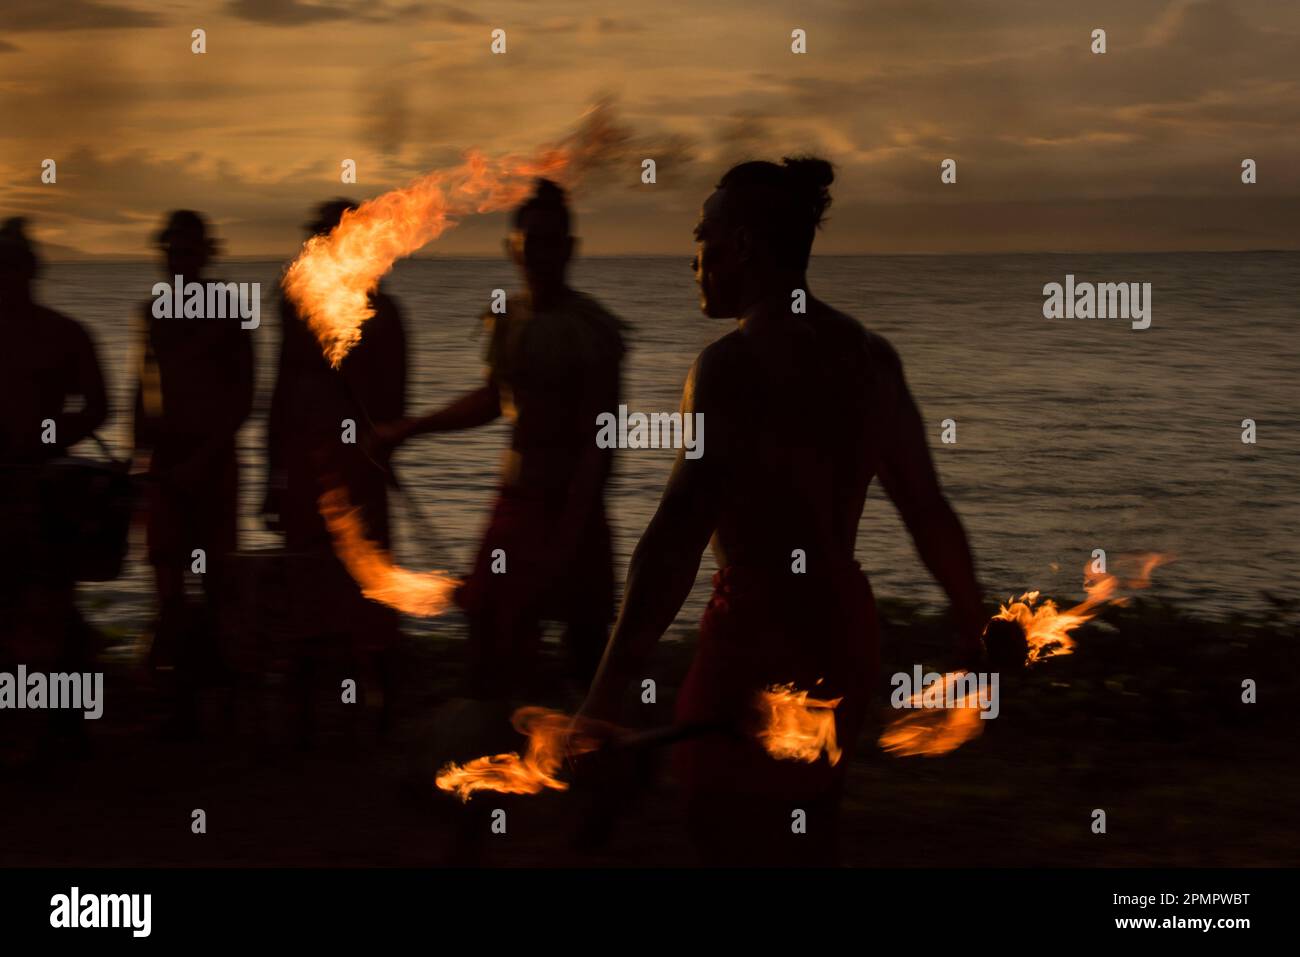 Traditional fire dance at sunset at a resort in Somoa; Apia, Samoa Stock Photo